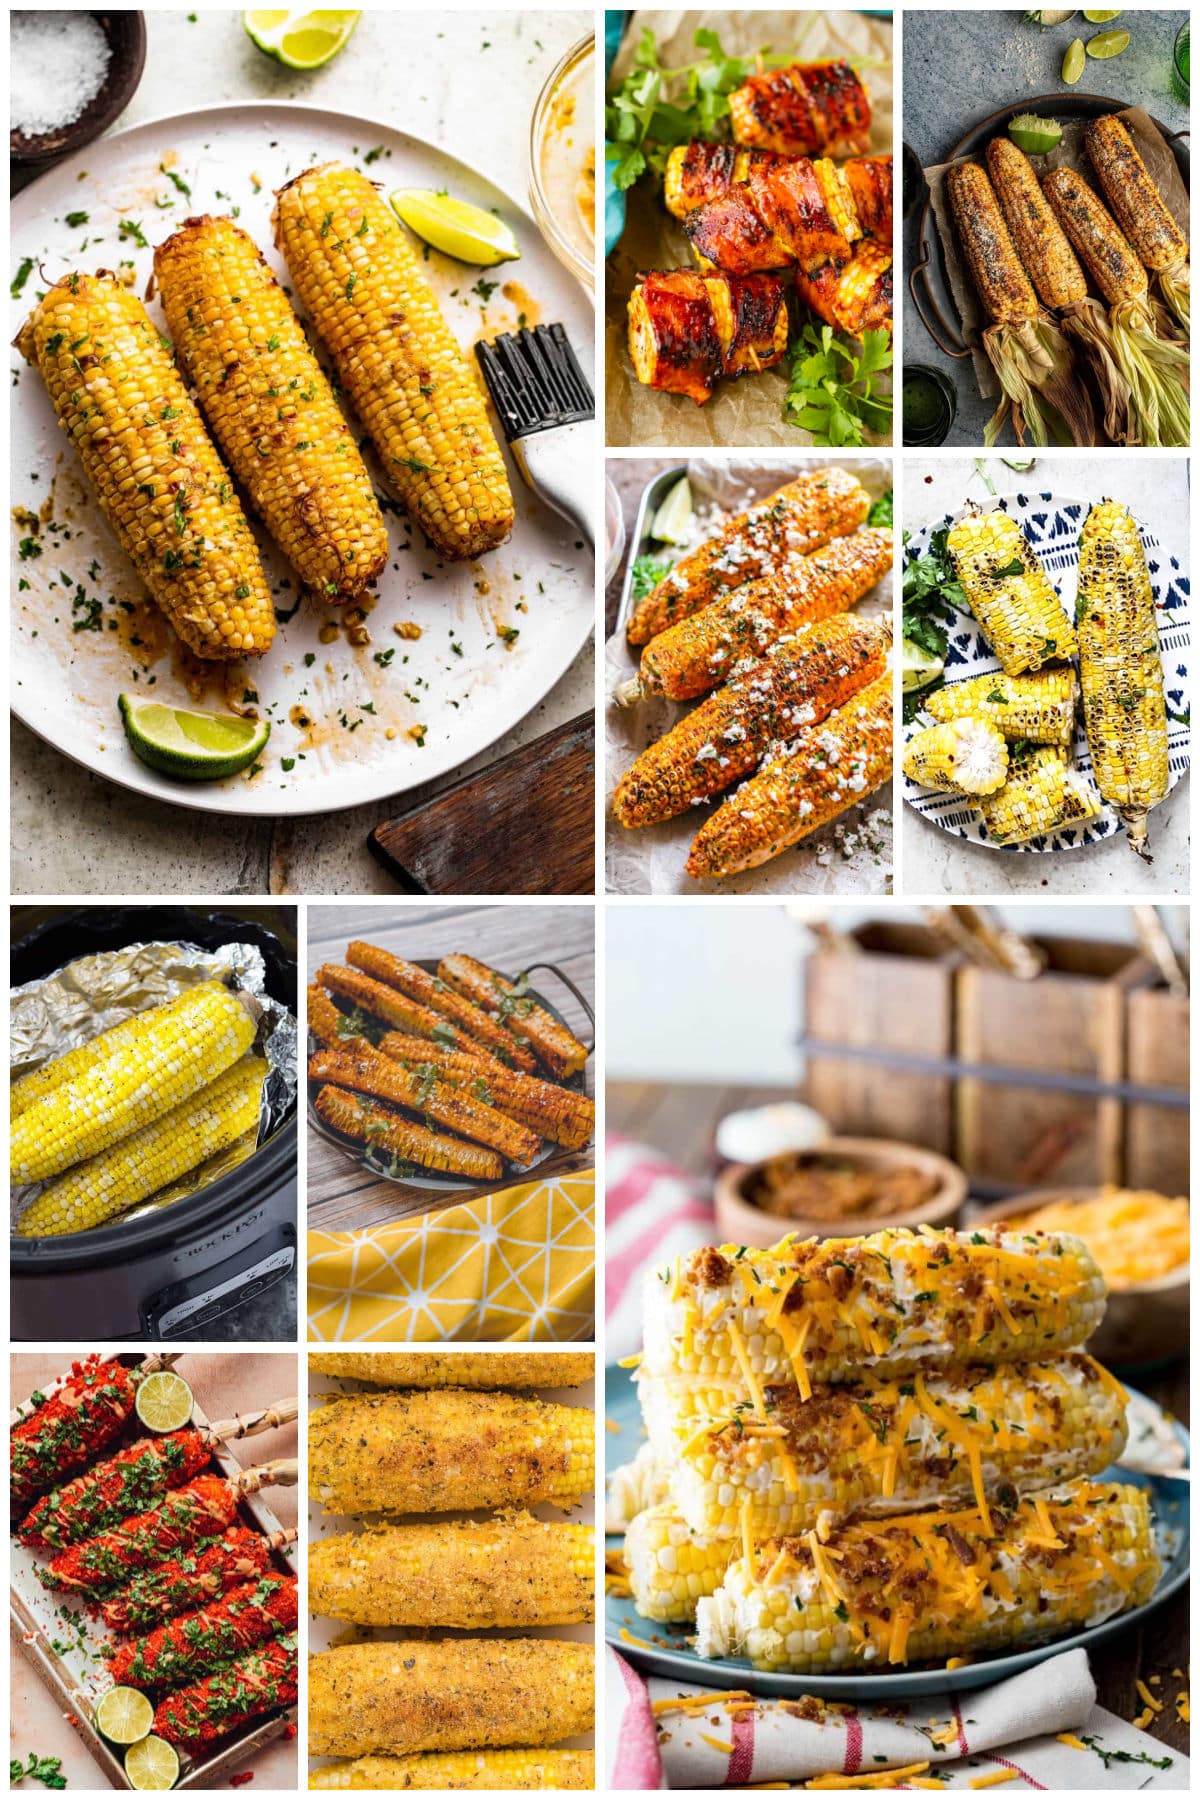 A group of delicious corn on the cob recipes like corn ribs, bacon wrapped corn and fried corn on the cob.